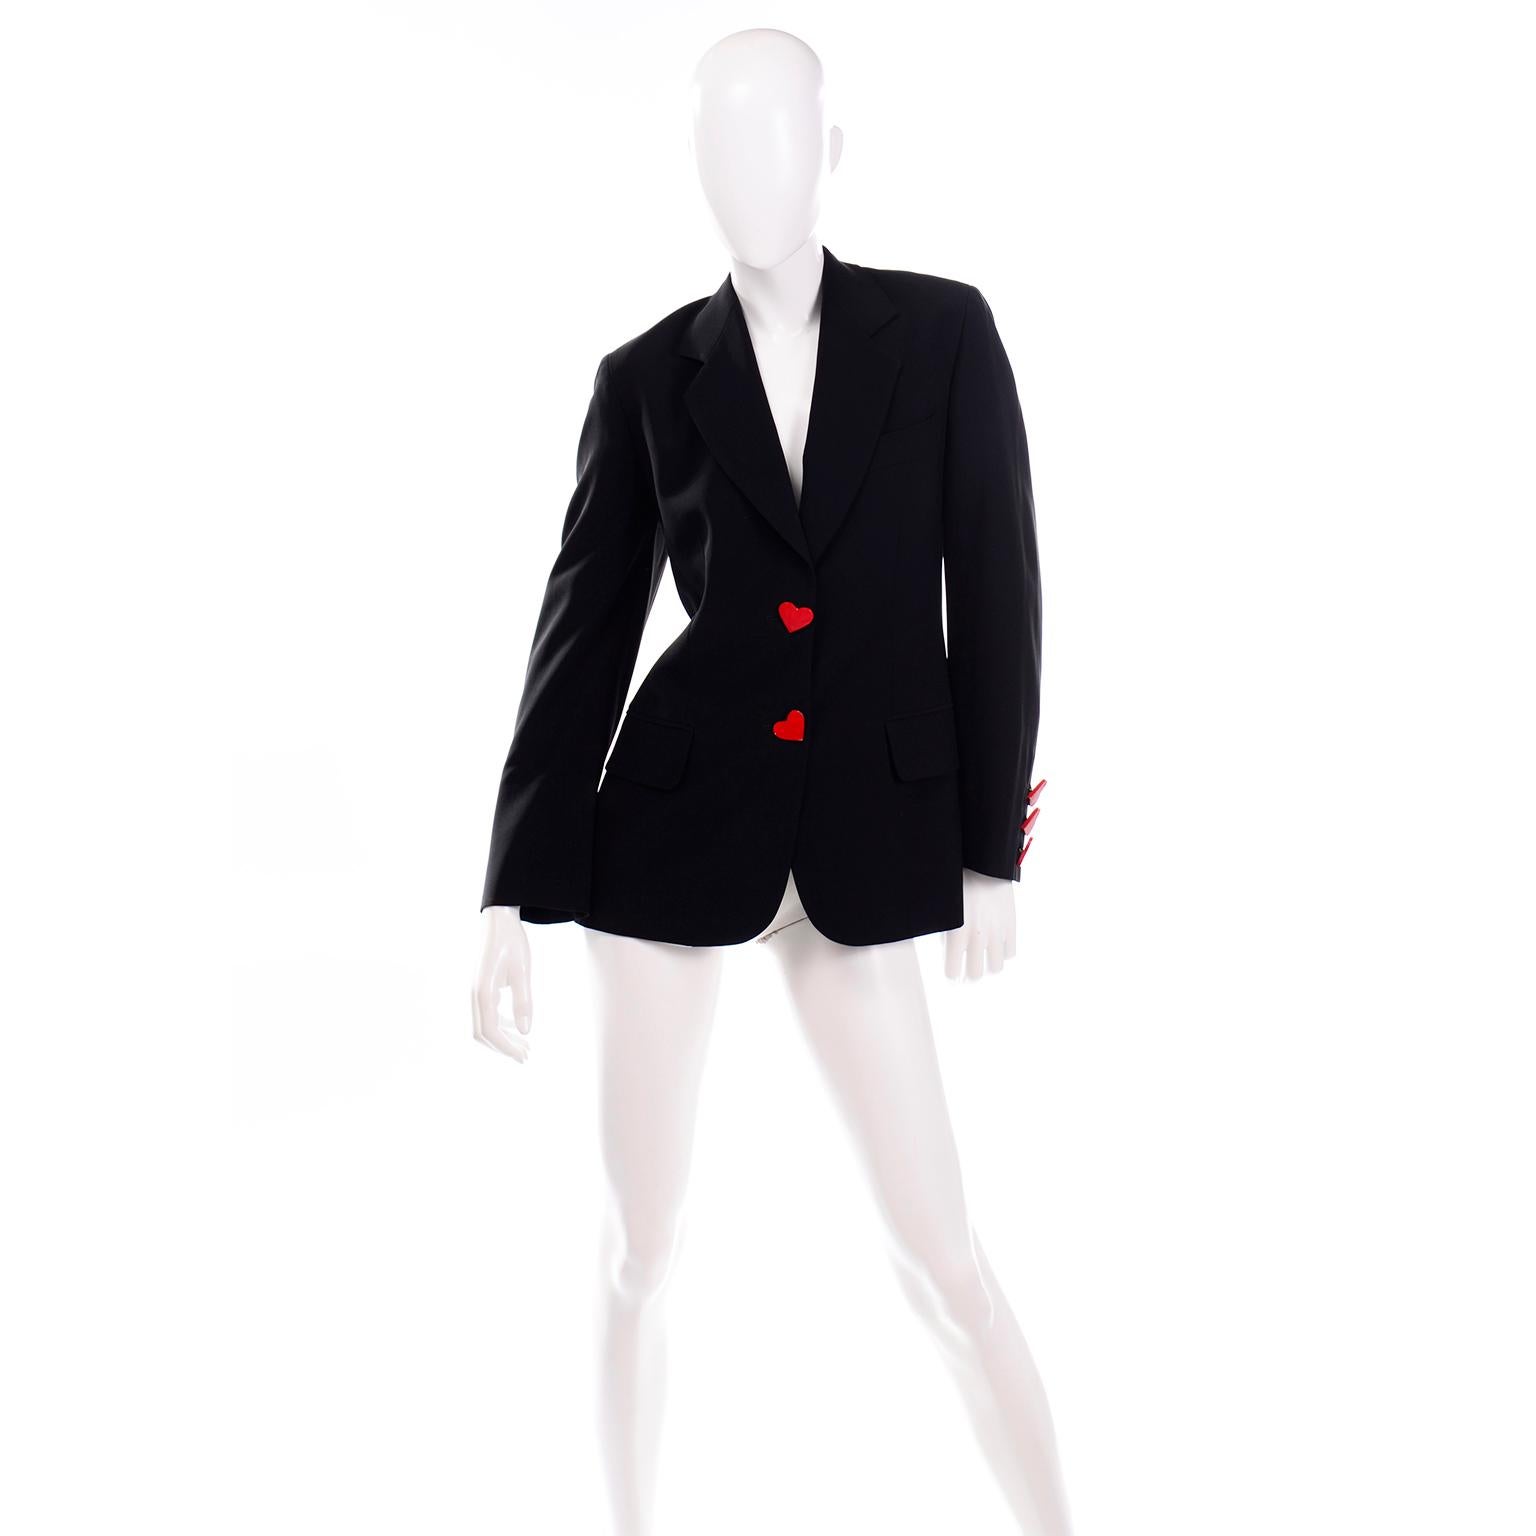 This is a rare, important vintage Franco Moschino Couture! Juvant Ace of Hearts Playing Card Blazer with red wooden heart buttons. This jacket was produced in 1993 among a select group of Franco Moschino's most important Couture pieces under the